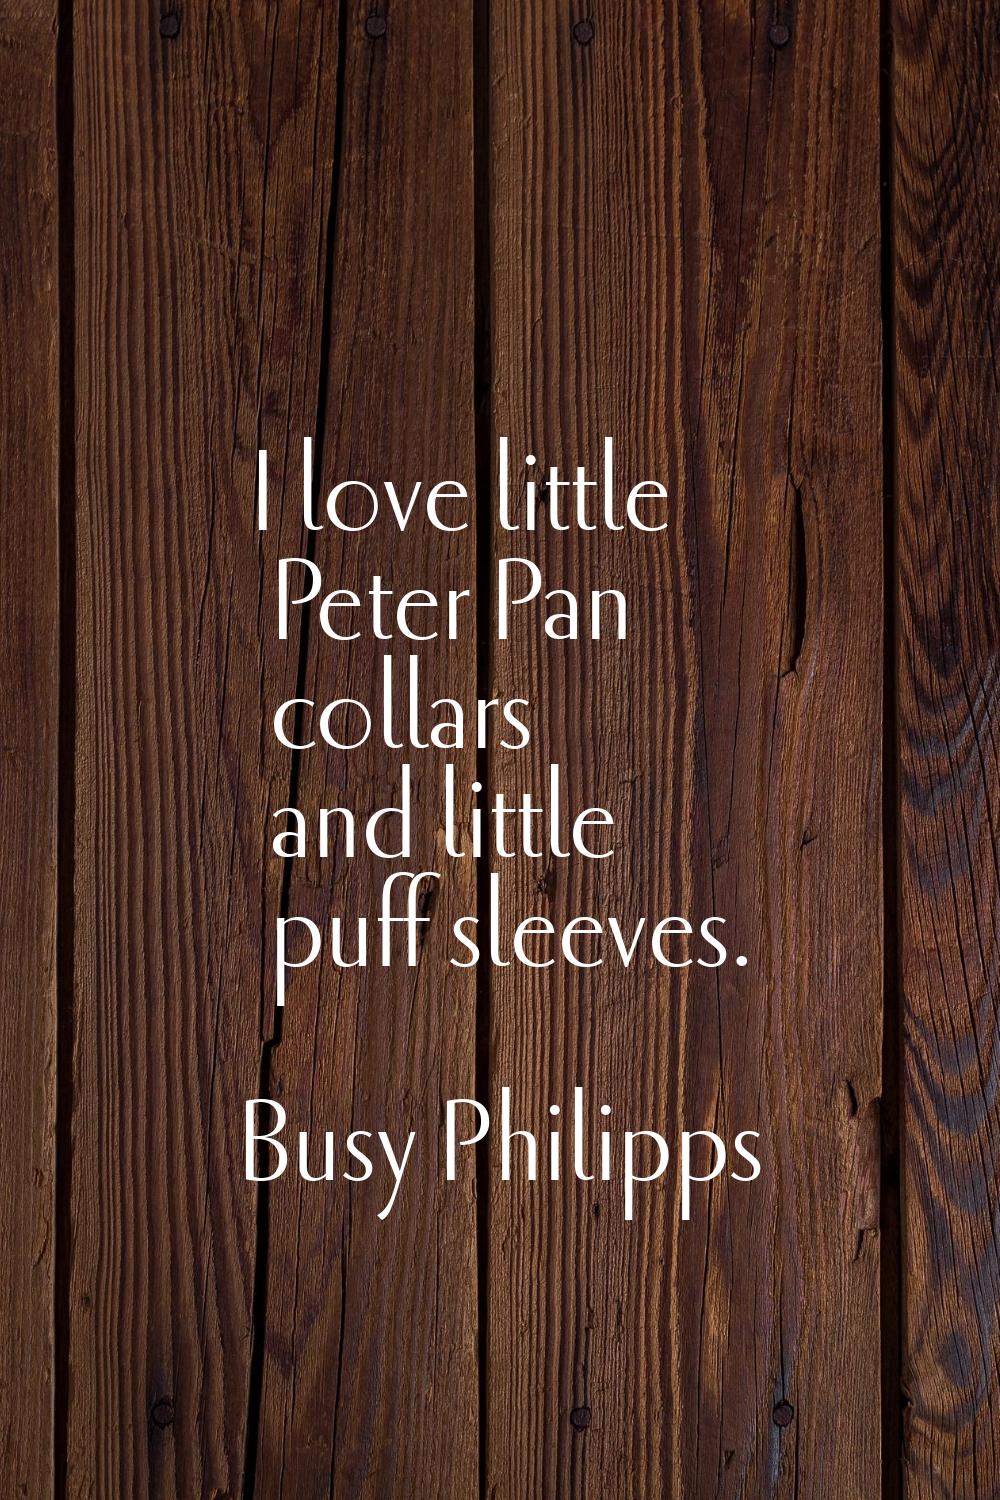 I love little Peter Pan collars and little puff sleeves.